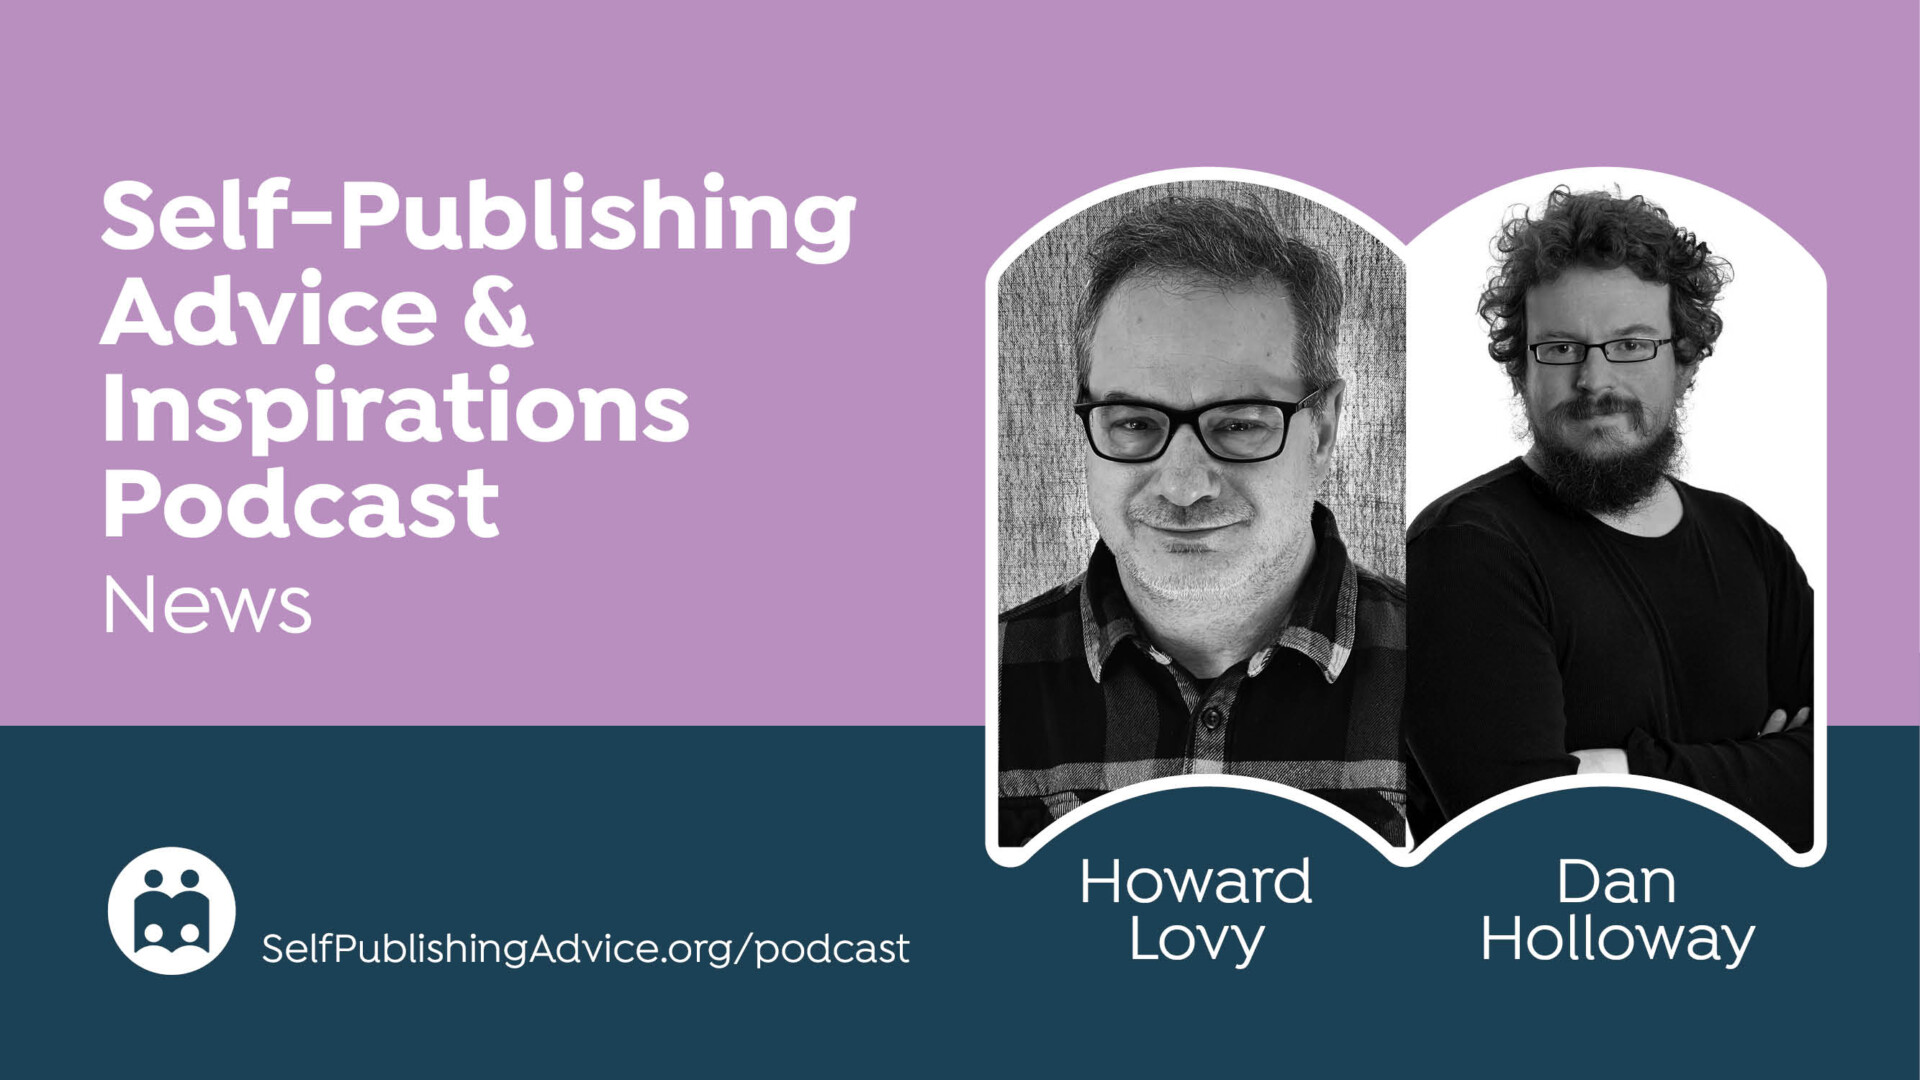 Governments Respond To AI And Copyright: Self-Publishing News Podcast With Dan Holloway And Howard Lovy